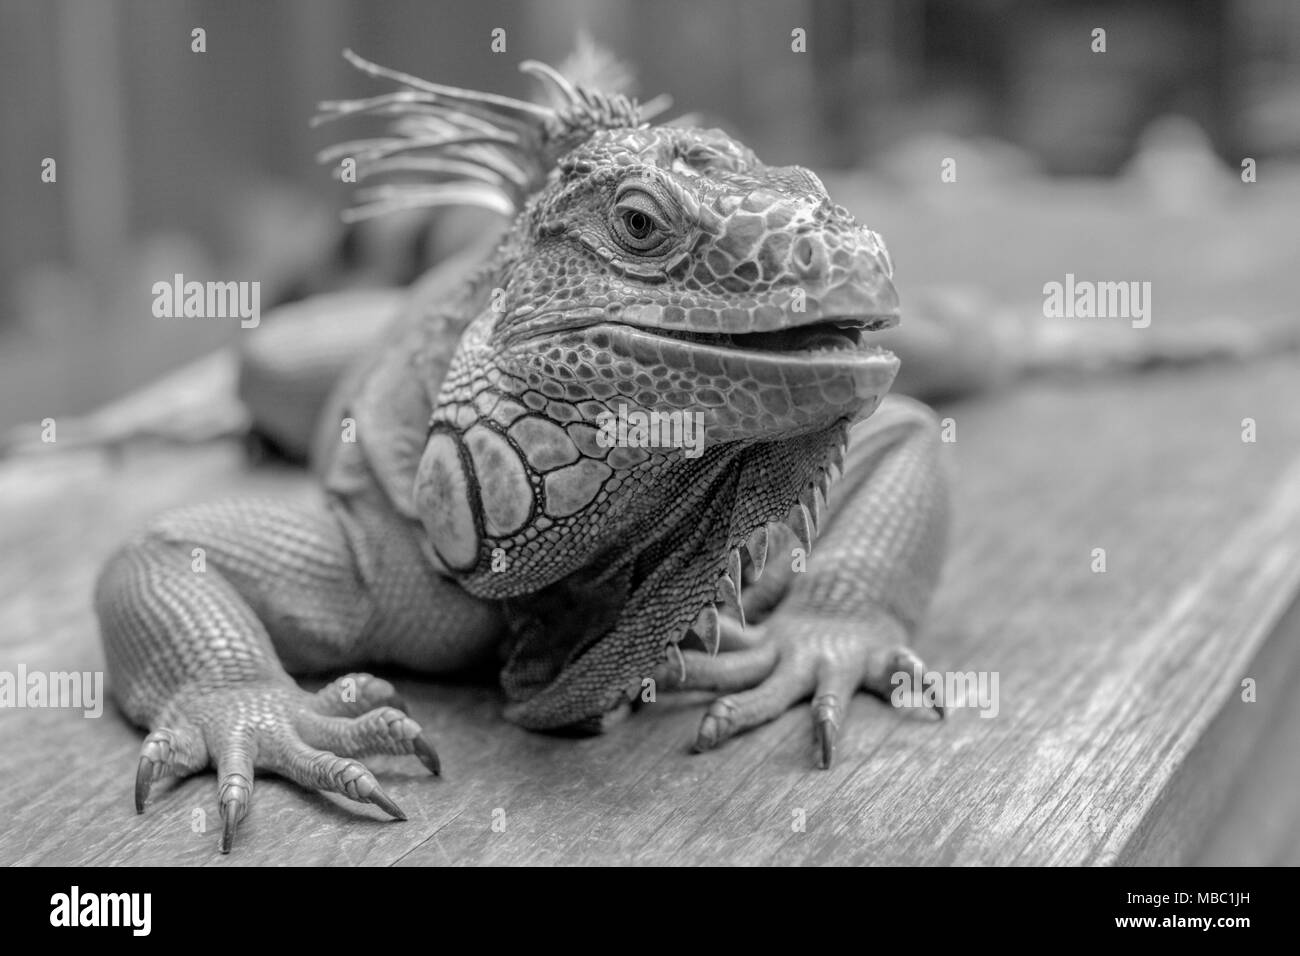 A lovely Iguana enjoy the warm day sun baking and have a nice posed to the camera Stock Photo